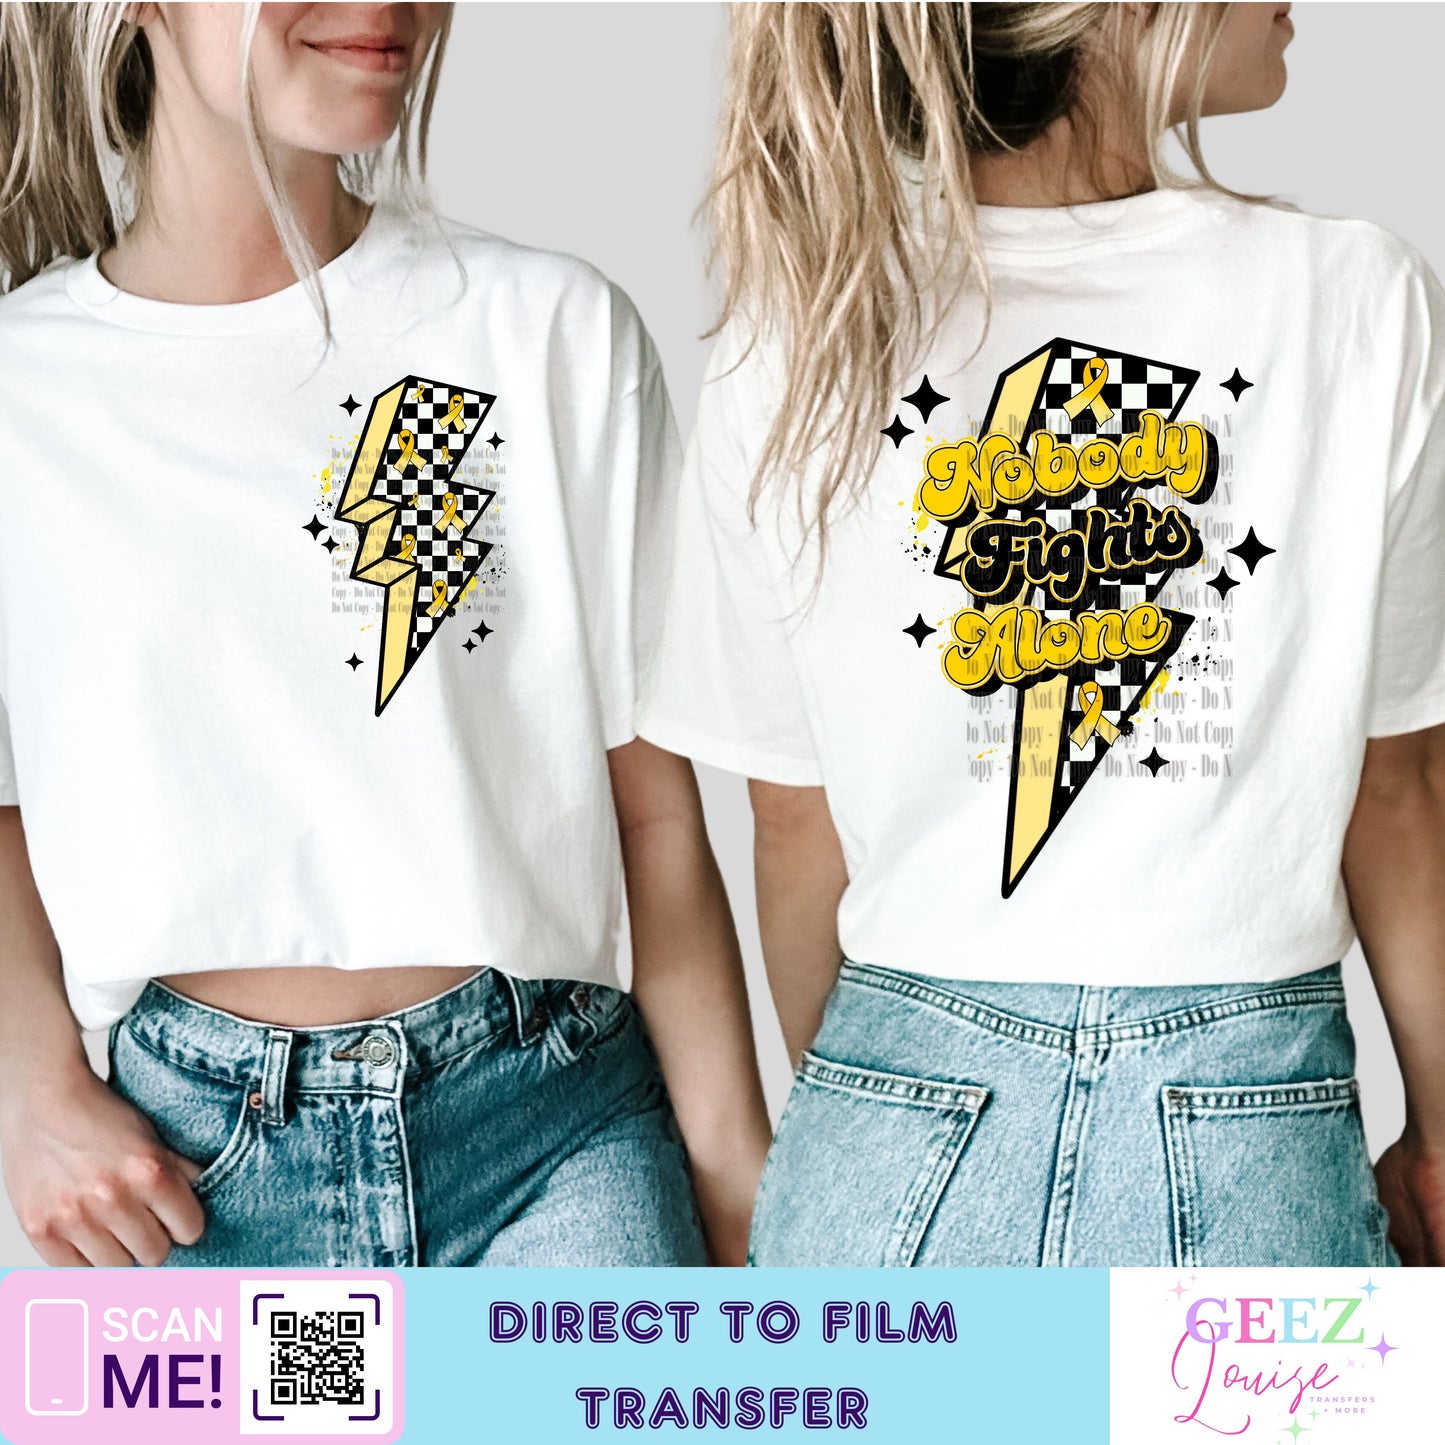 Nobody fights alone childhood cancer awareness - Direct to Film Transfer - made to order